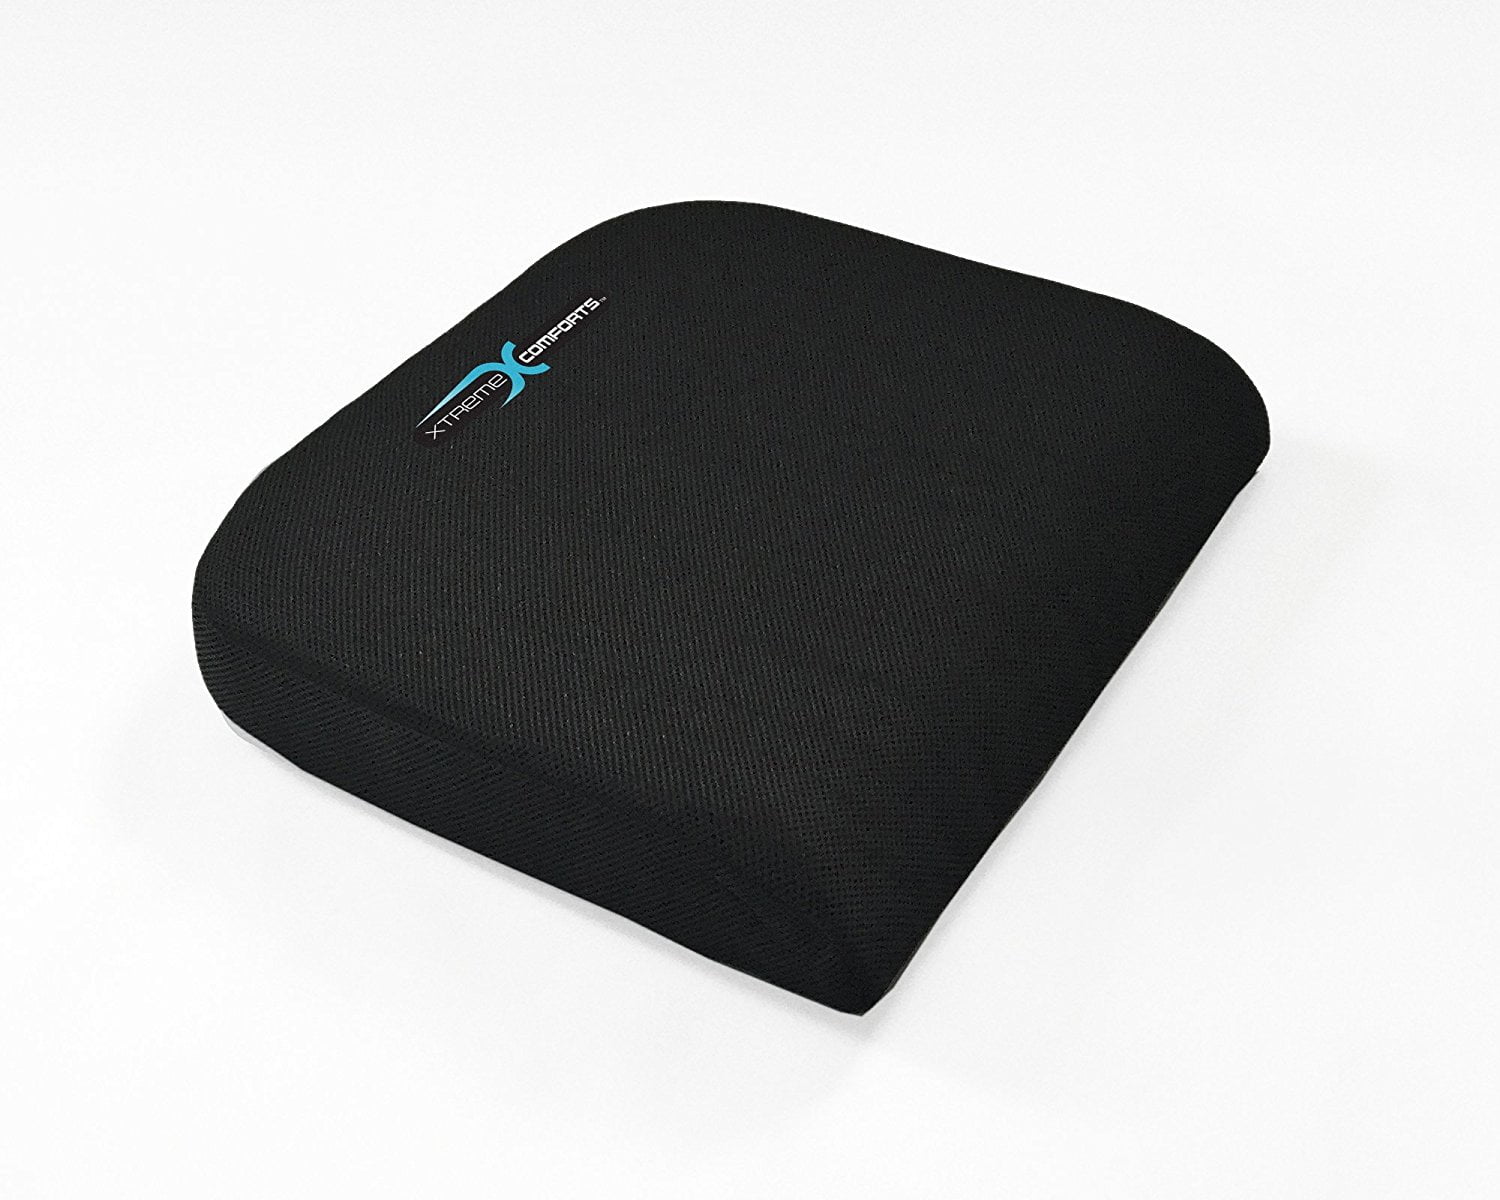 Large Seat Cushion with Carry Handle and Anti Slip Bottom GIVES RELIEF FROM  BACK PAIN by Xtreme Comforts